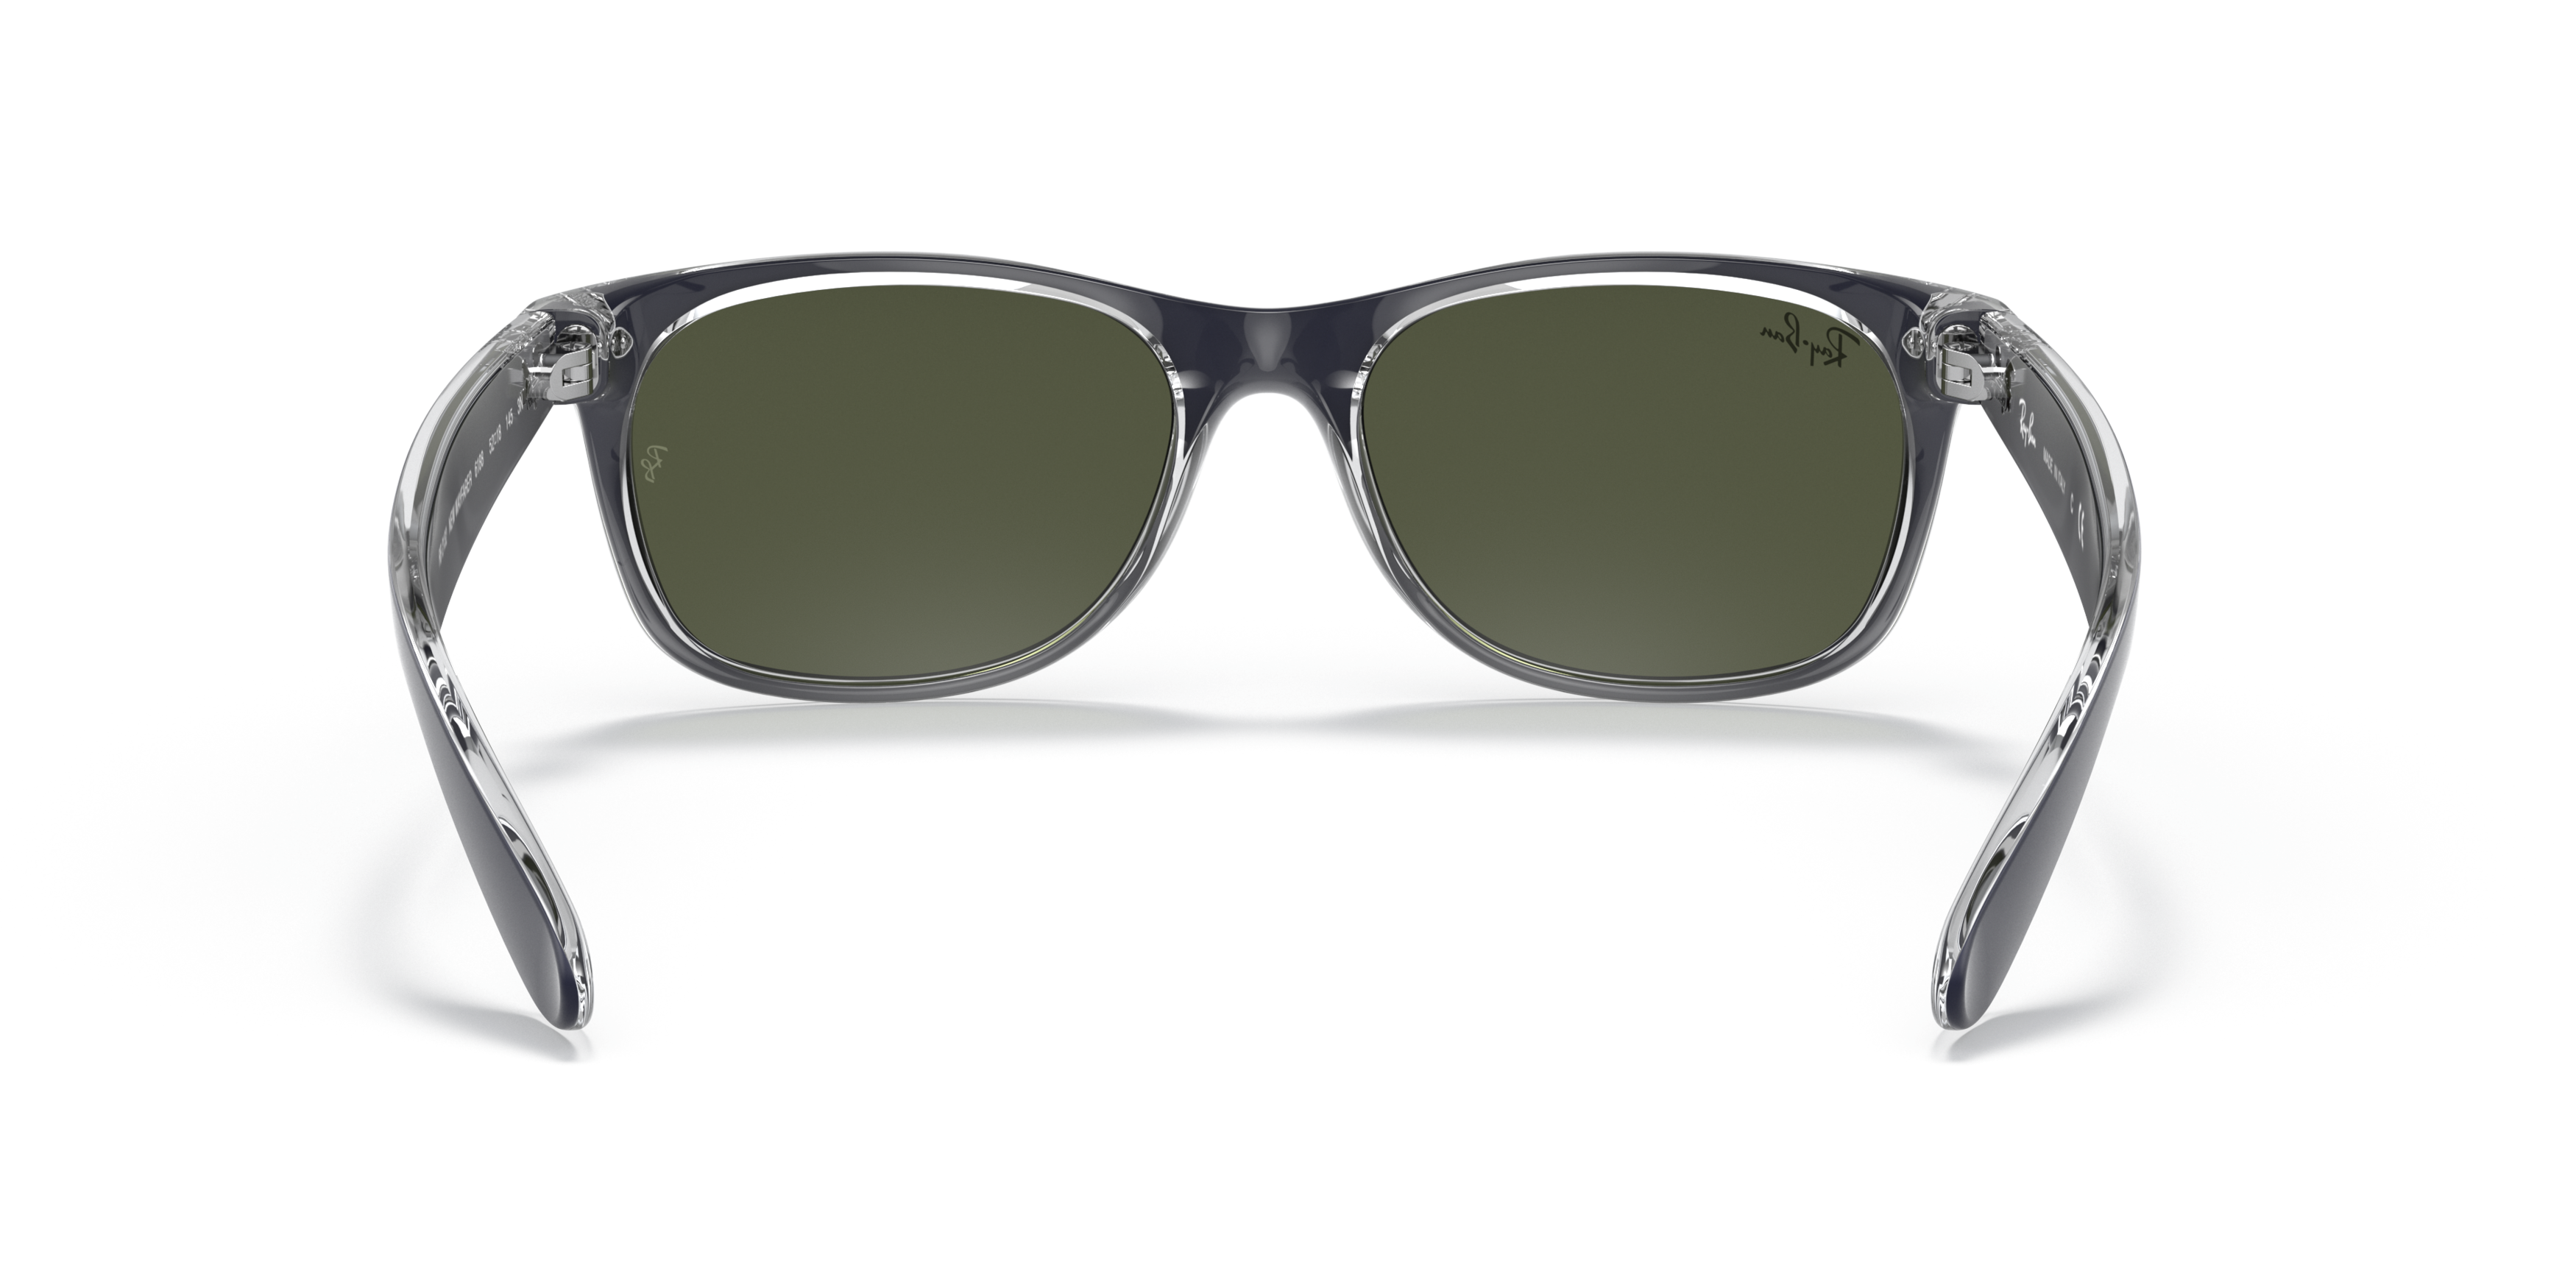 [products.image.detail02] Ray-Ban New Wayfarer Bicolor RB2132 6188